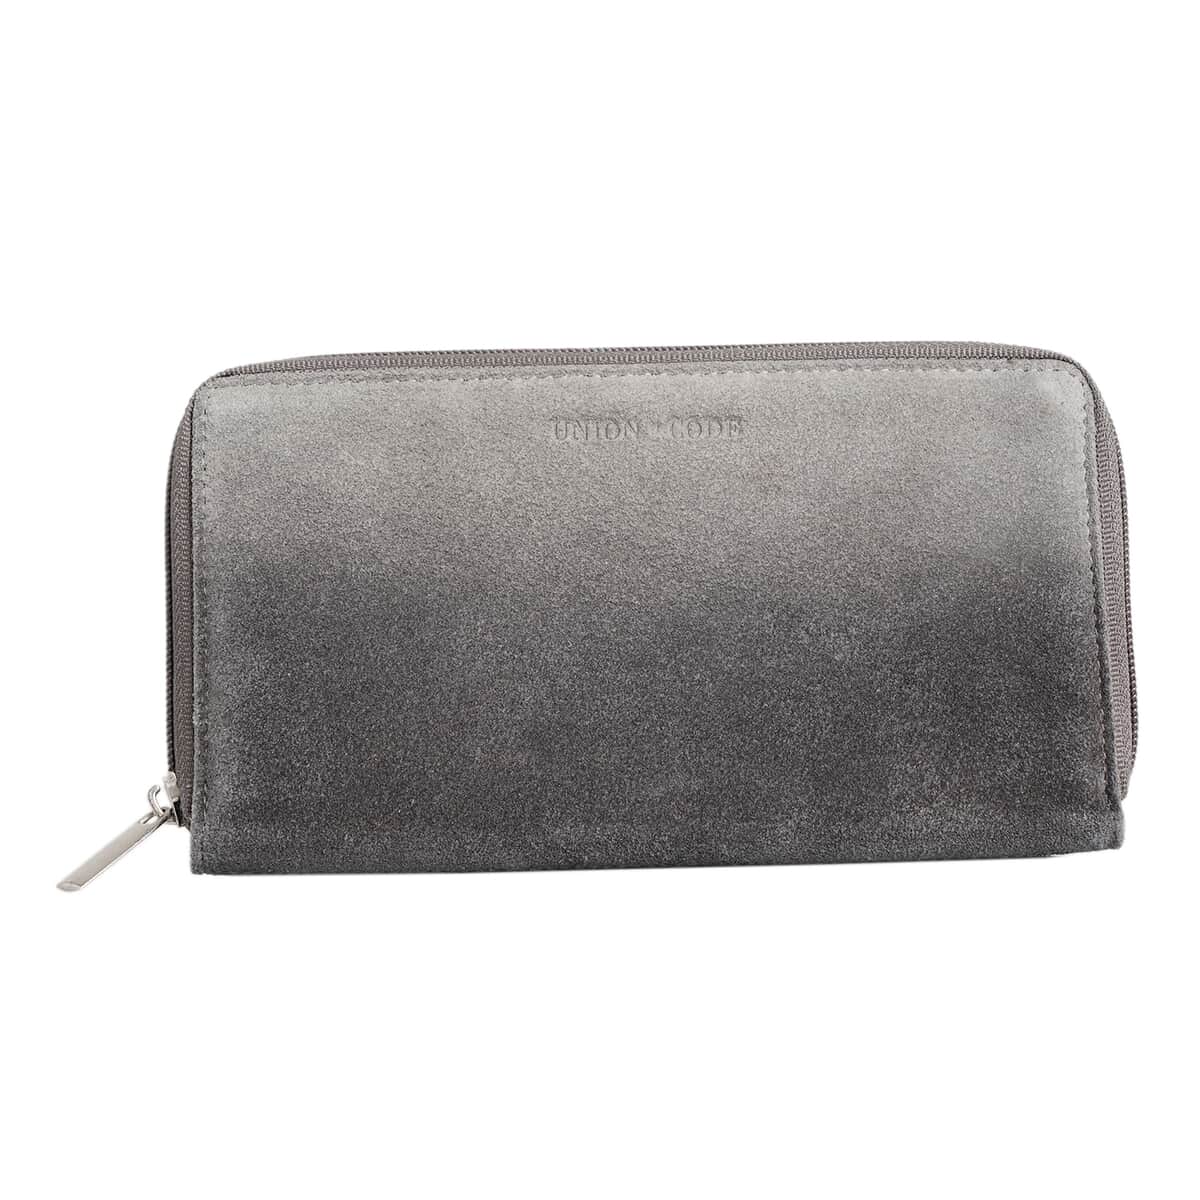 "UNION CODE -RFID Protected 100% Genuine Leather Women's Wallet SIZE: 7.5(L)x4.5(W) inches COLOR: Black " image number 0